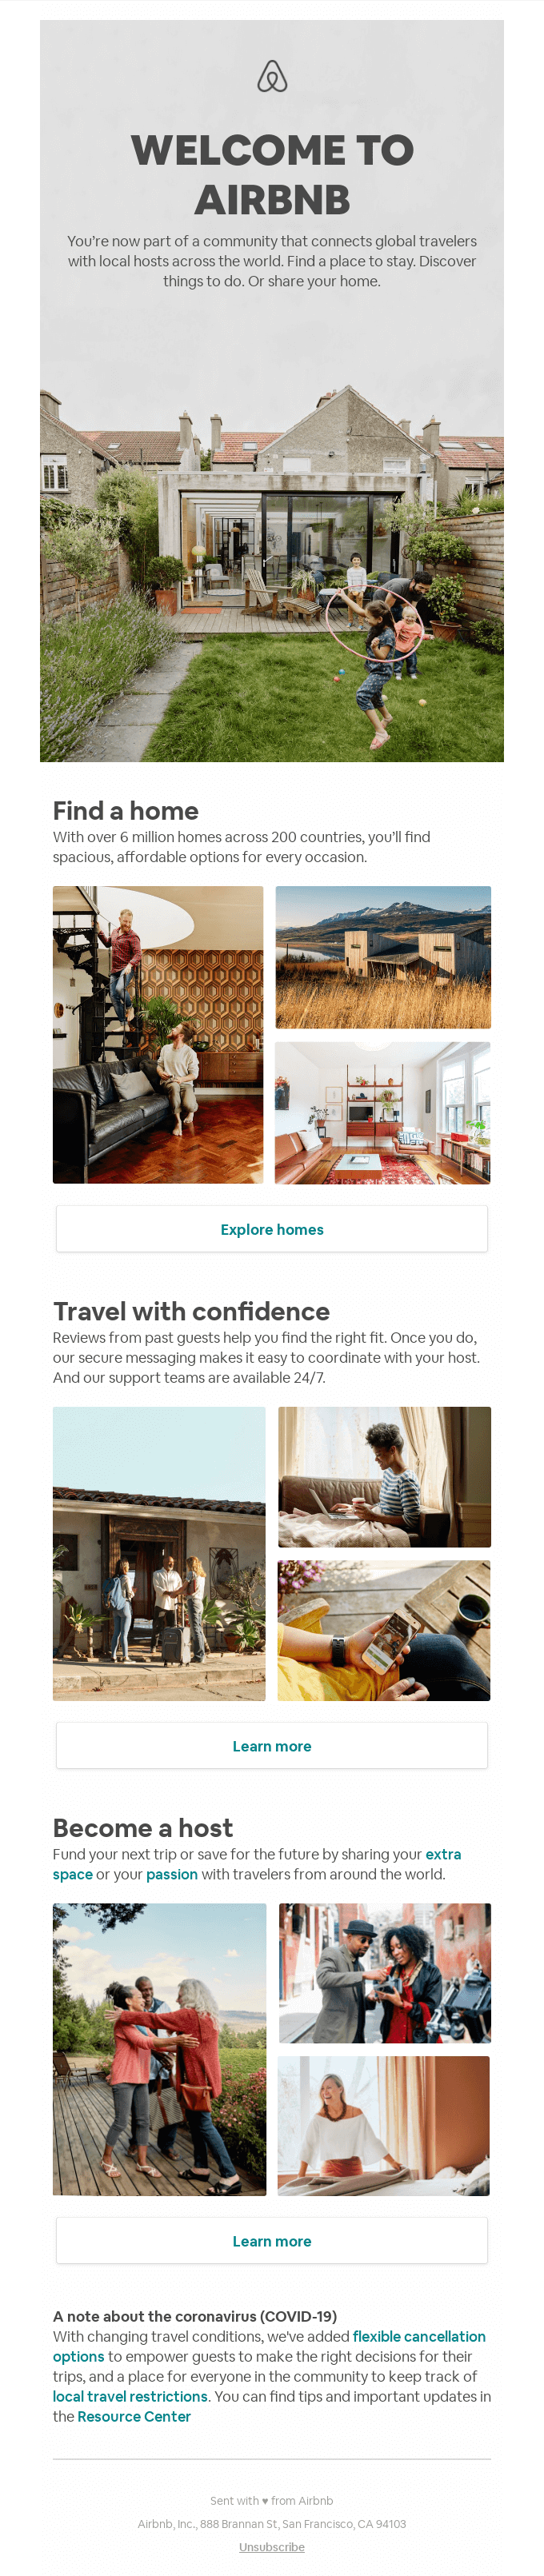 First purchase welcome emails - Air BNB